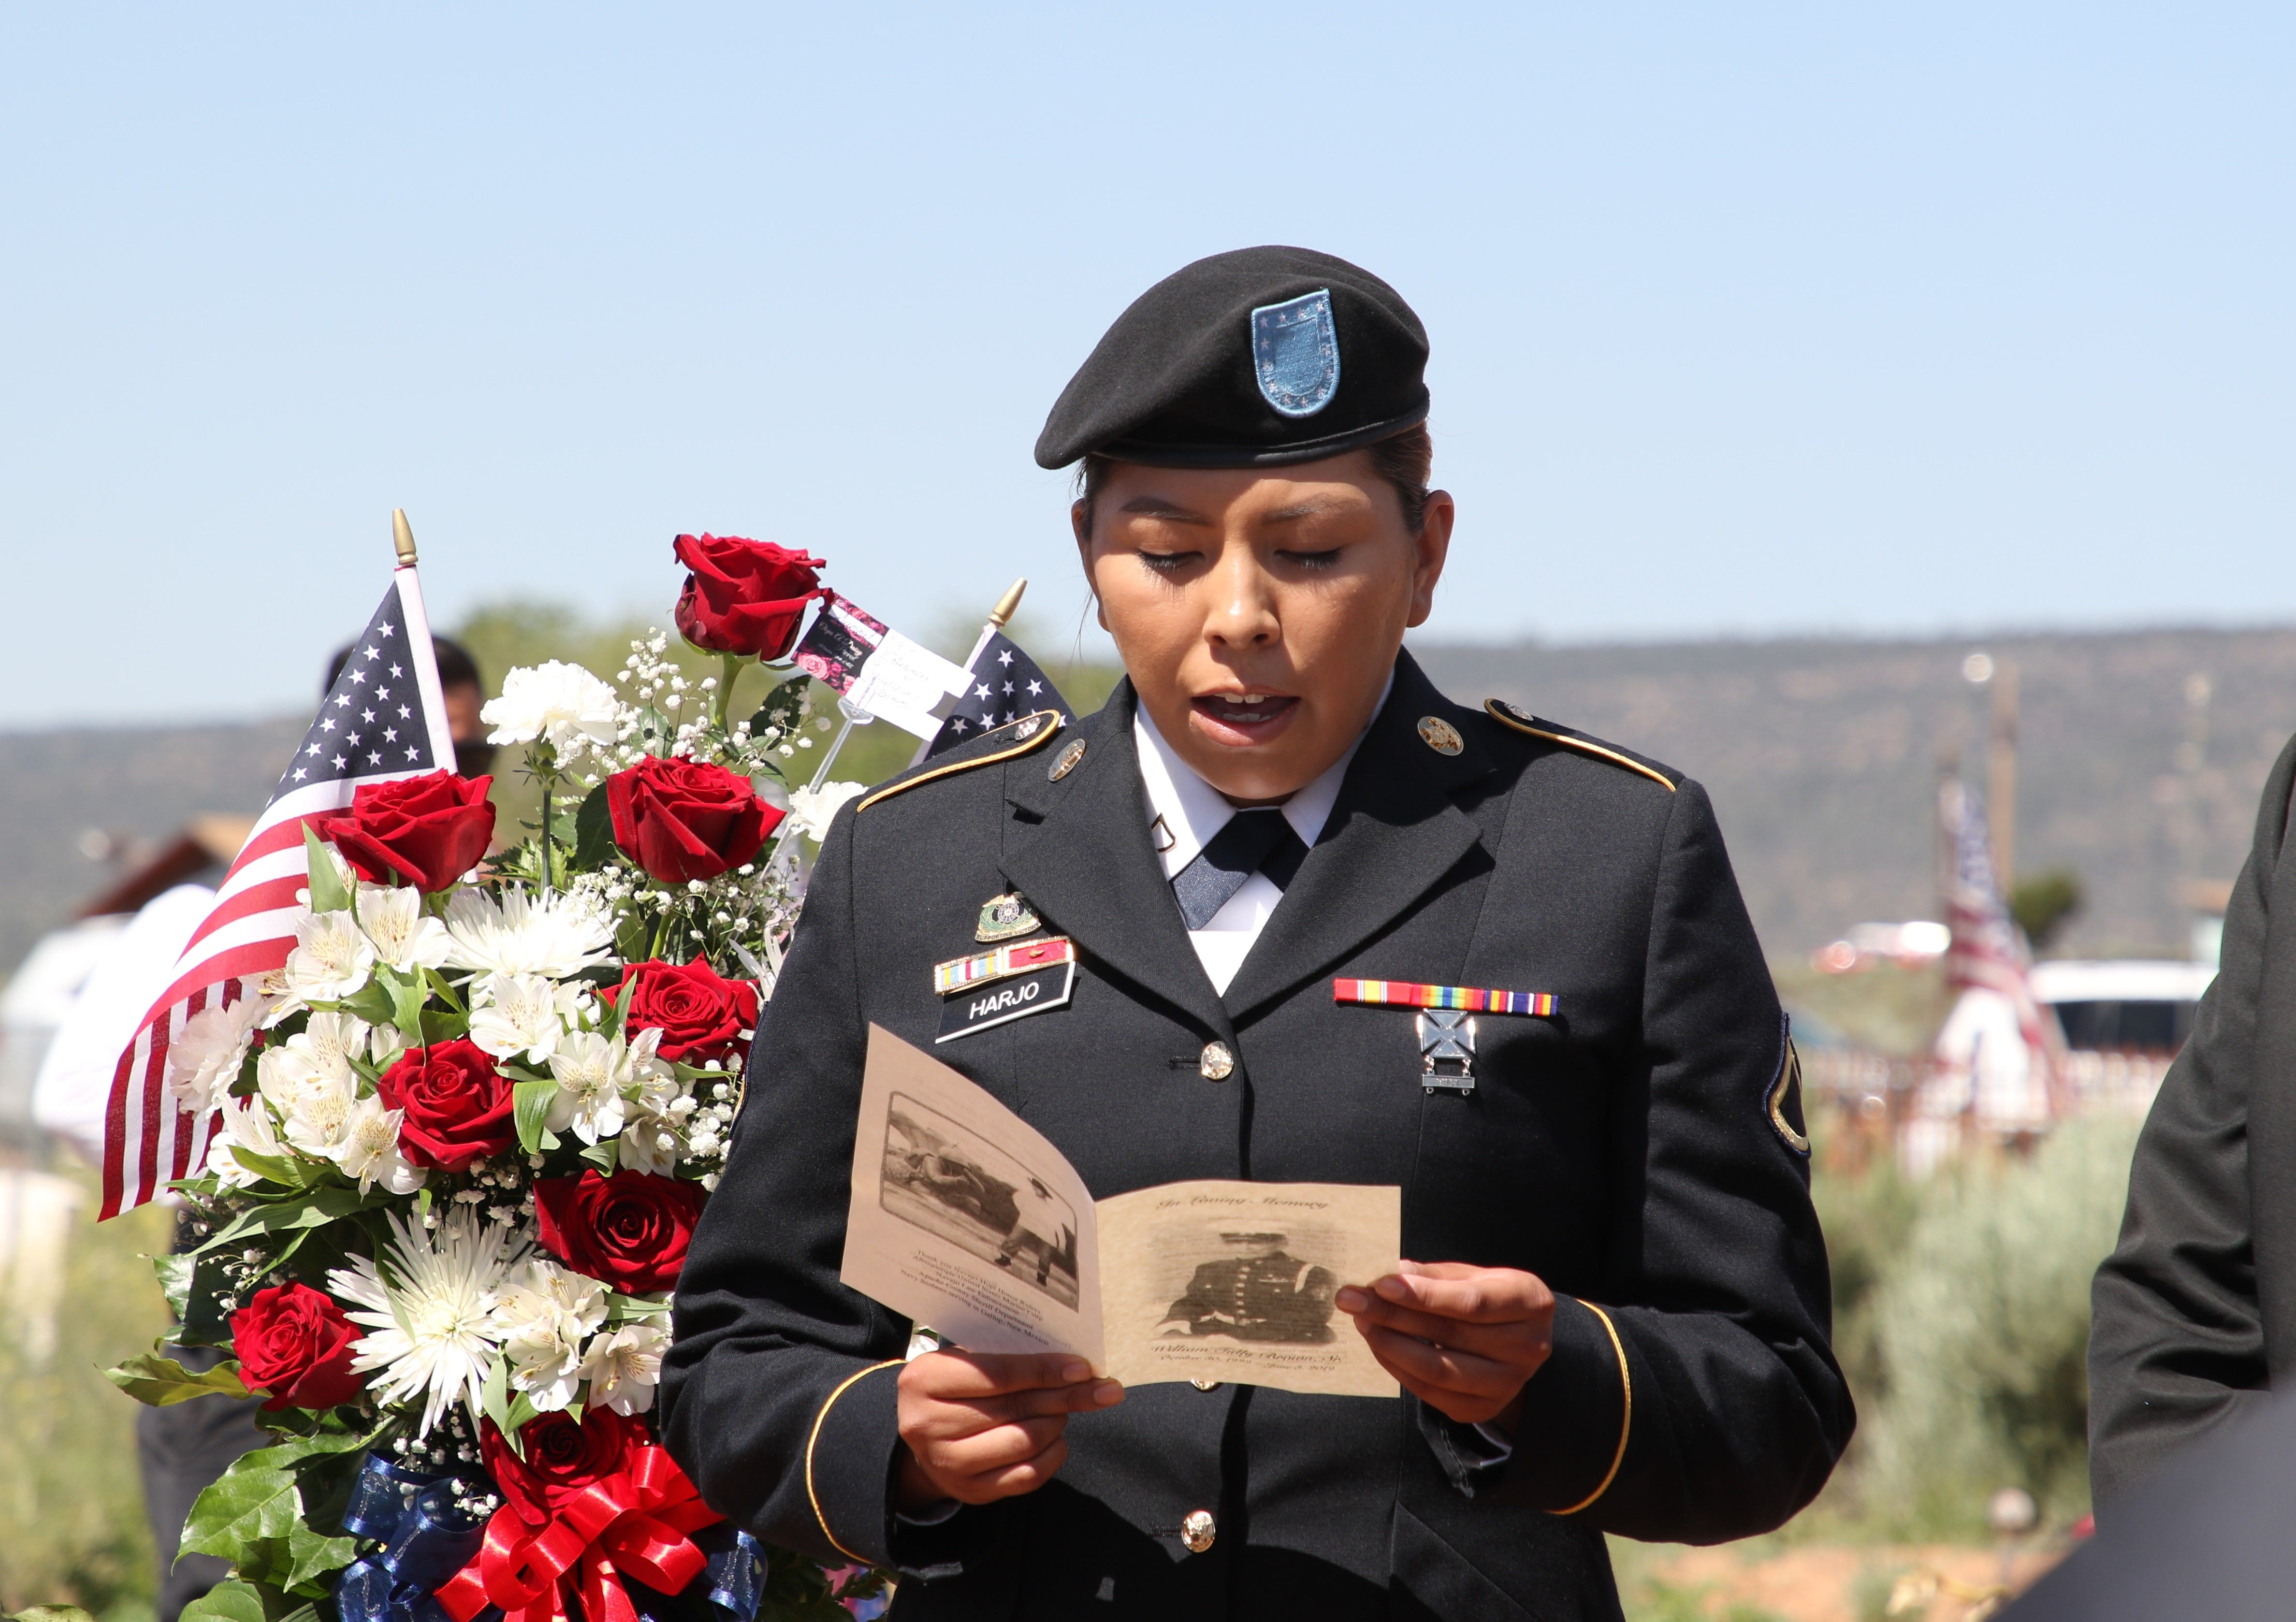 A great-granddaughter of Navajo Code Talker William Tully Brown Sr. reads a poem during the June 6 memorial service at the Fort Defiance Veterans Cemetery in Fort Defiance, Ariz.